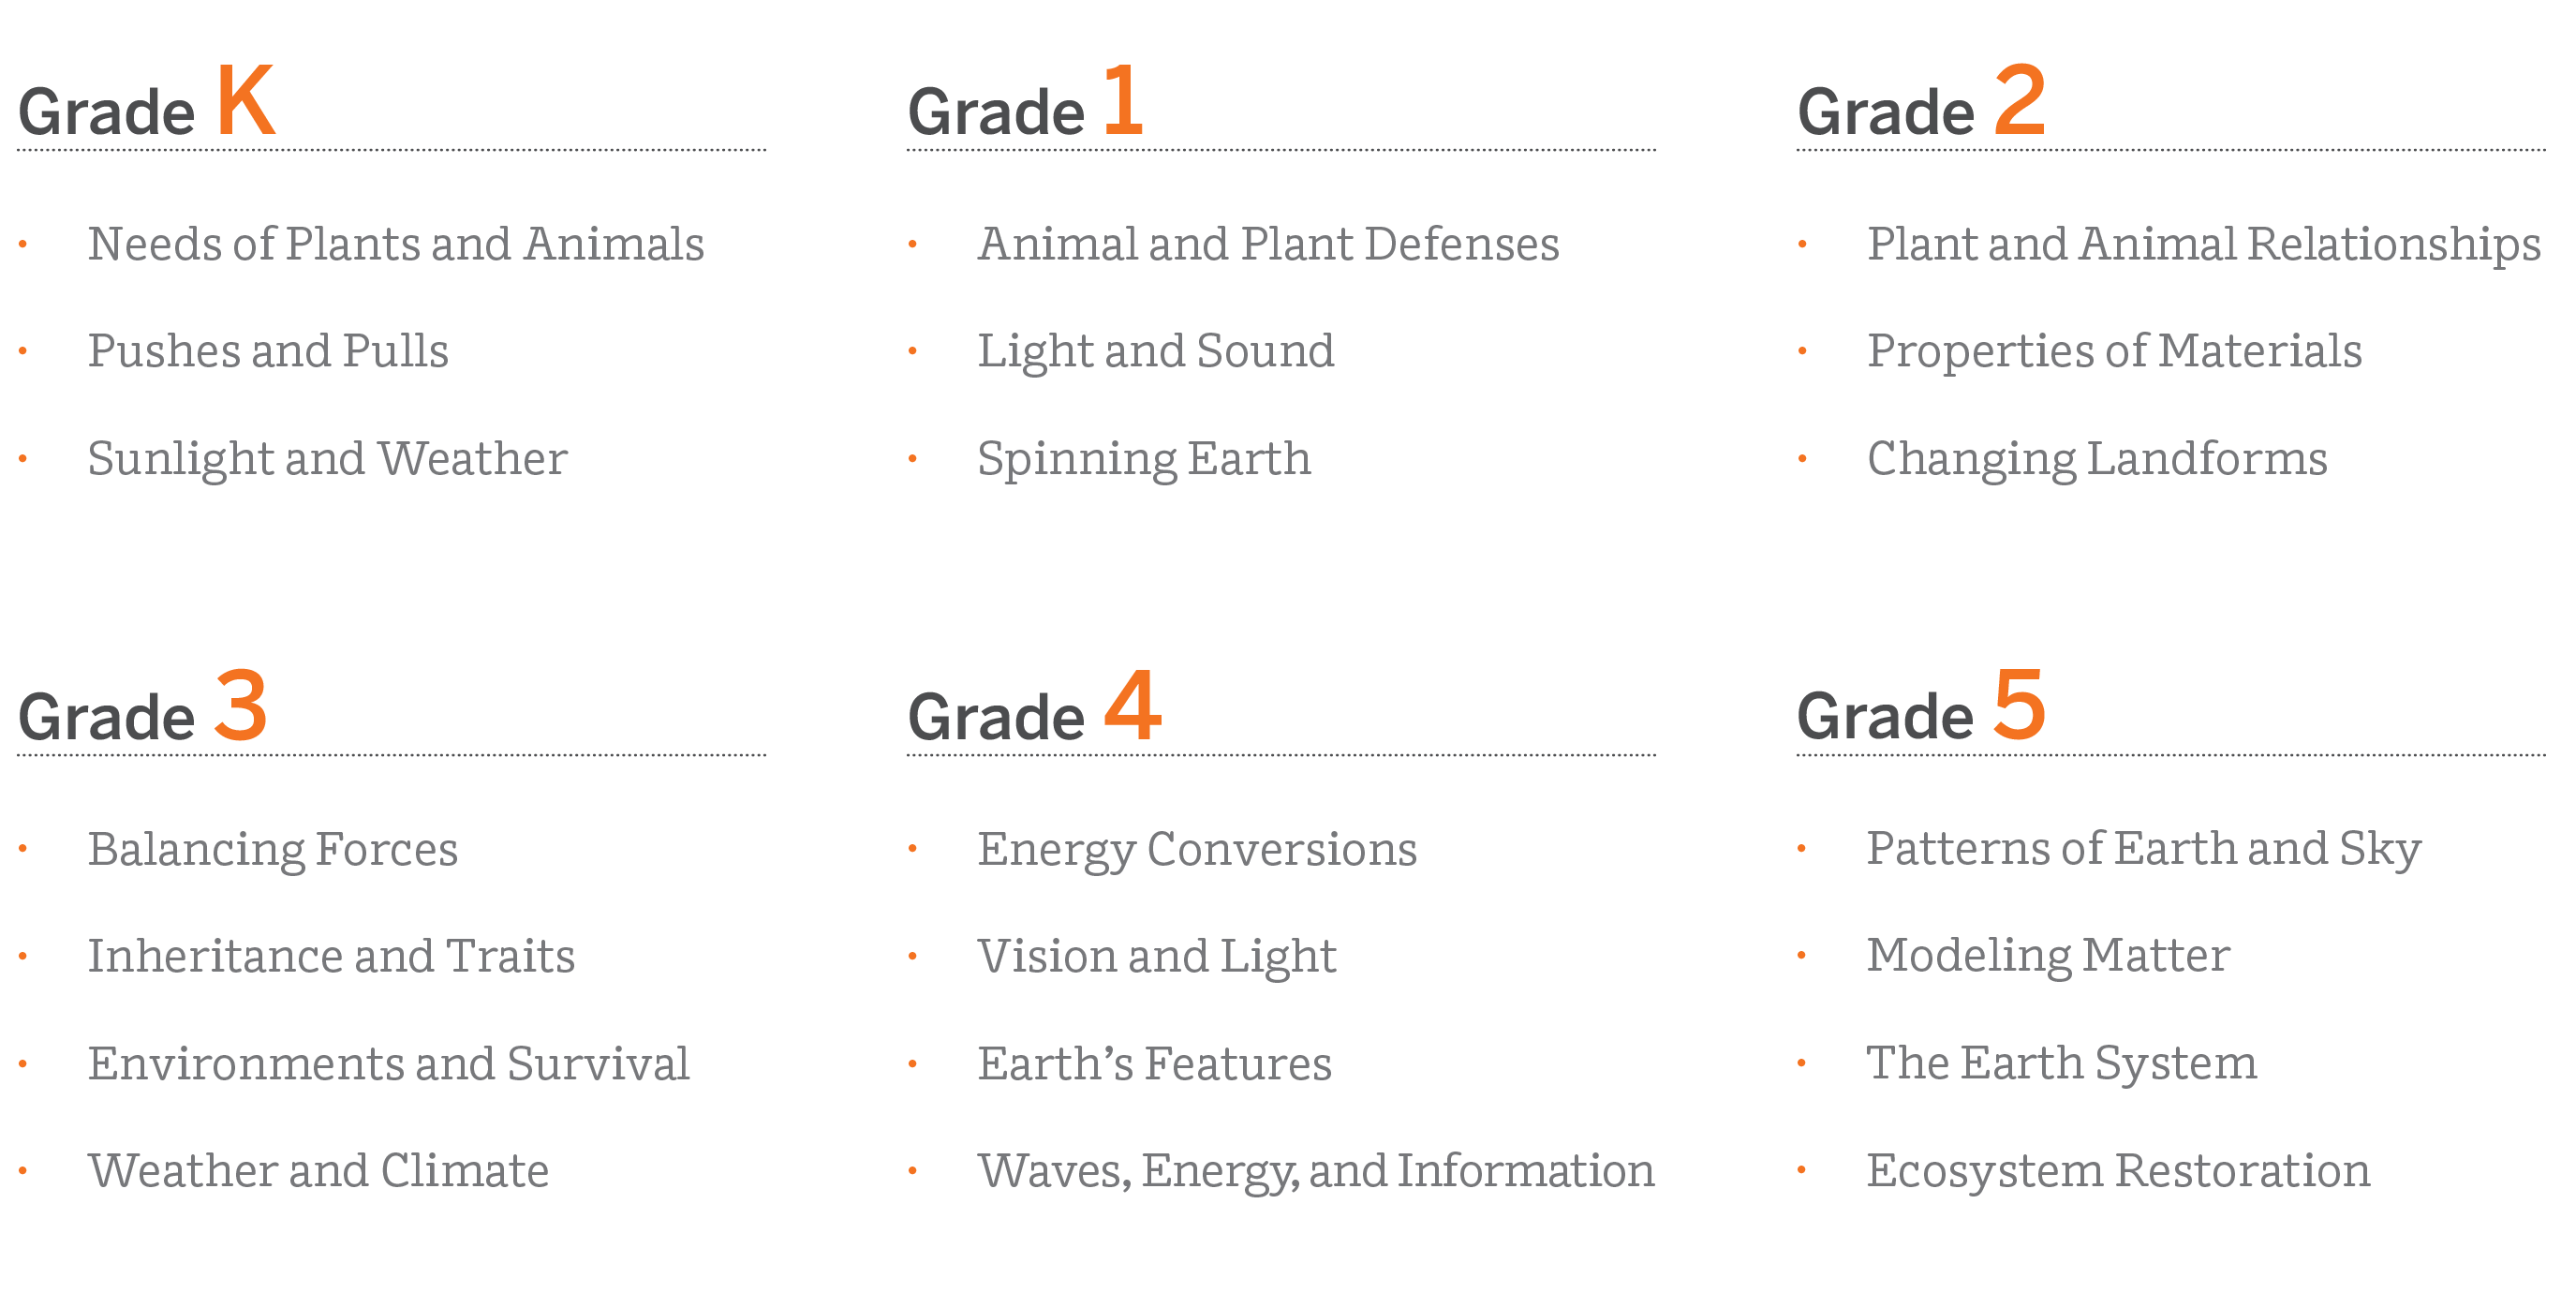 Chart showing science curriculum topics by grade from kindergarten to grade 5, including subjects like plant needs, animal defense, energy conversions, and ecosystem restoration.